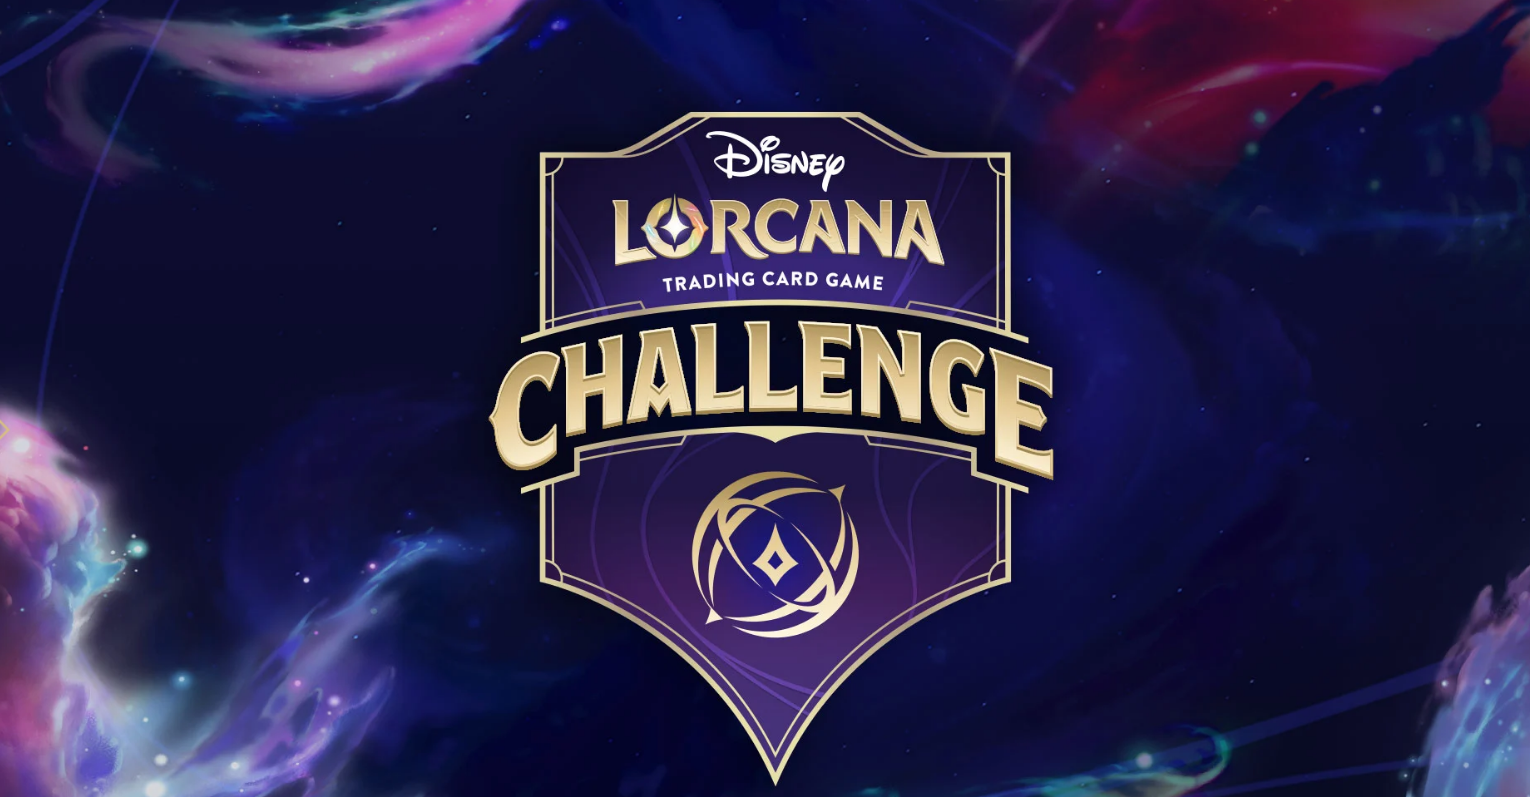 Ravensburger To Reevaluate Disney Lorcana Challenge Structure After Tickets Sell Out In Under A Minute